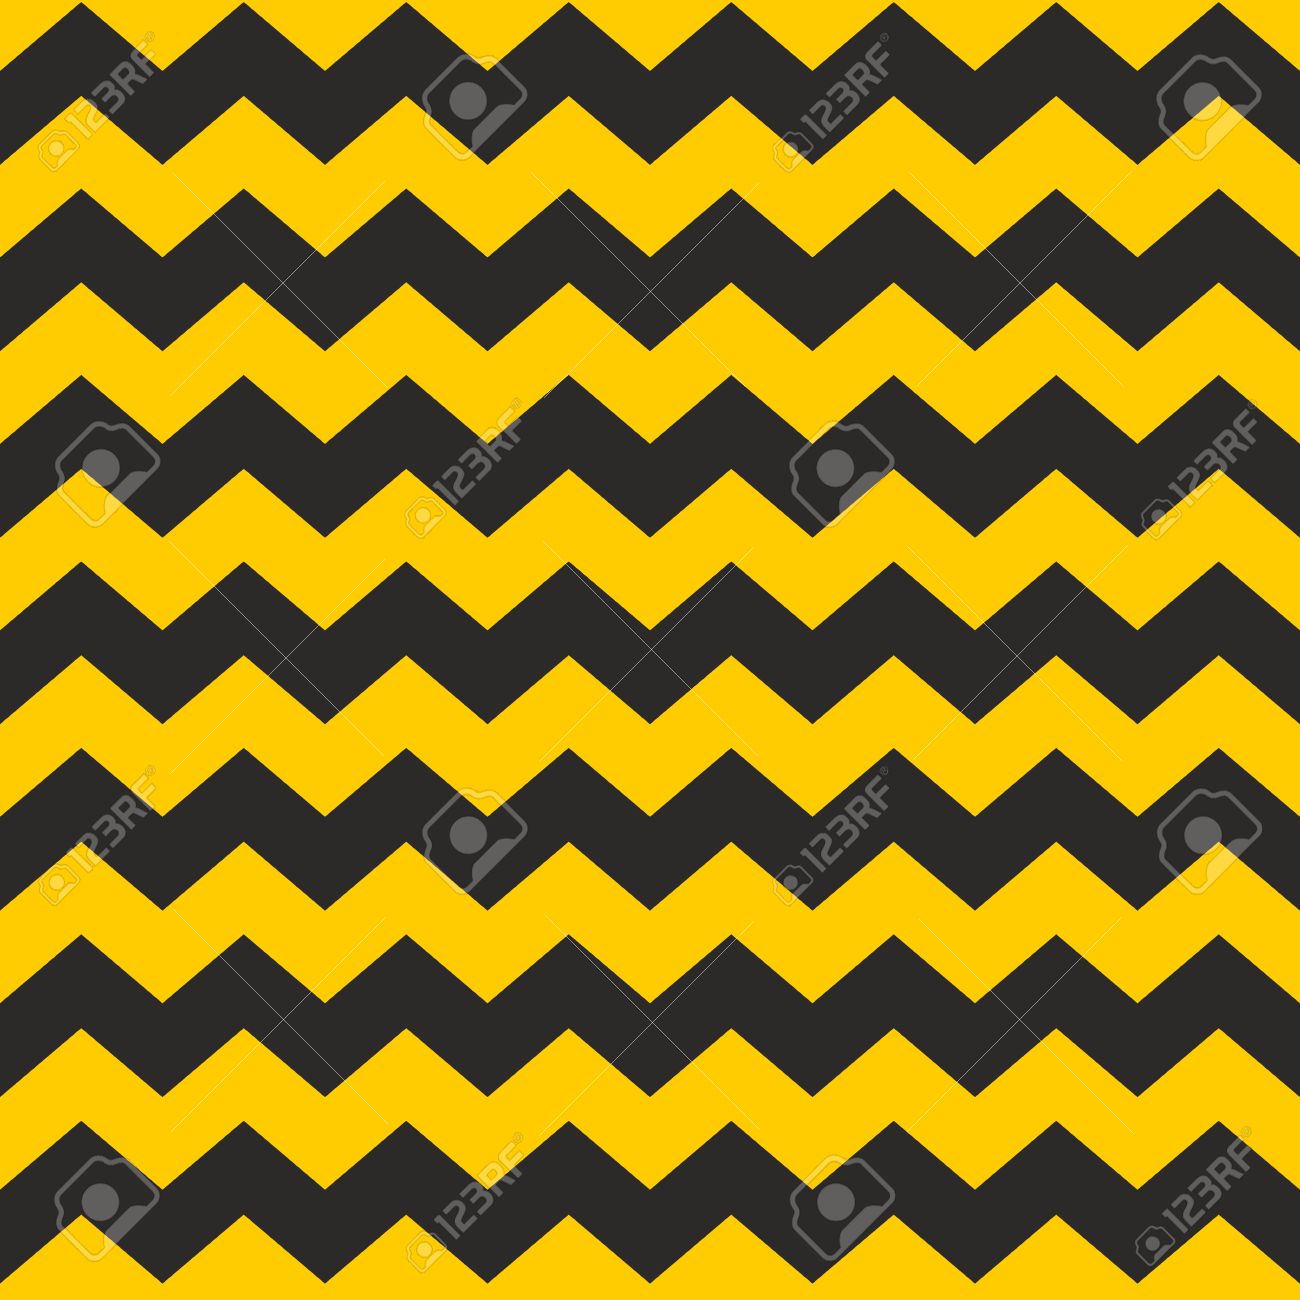 Zig Zag Chevron Black And Yellow Tile Vector Pattern Or Wallpaper